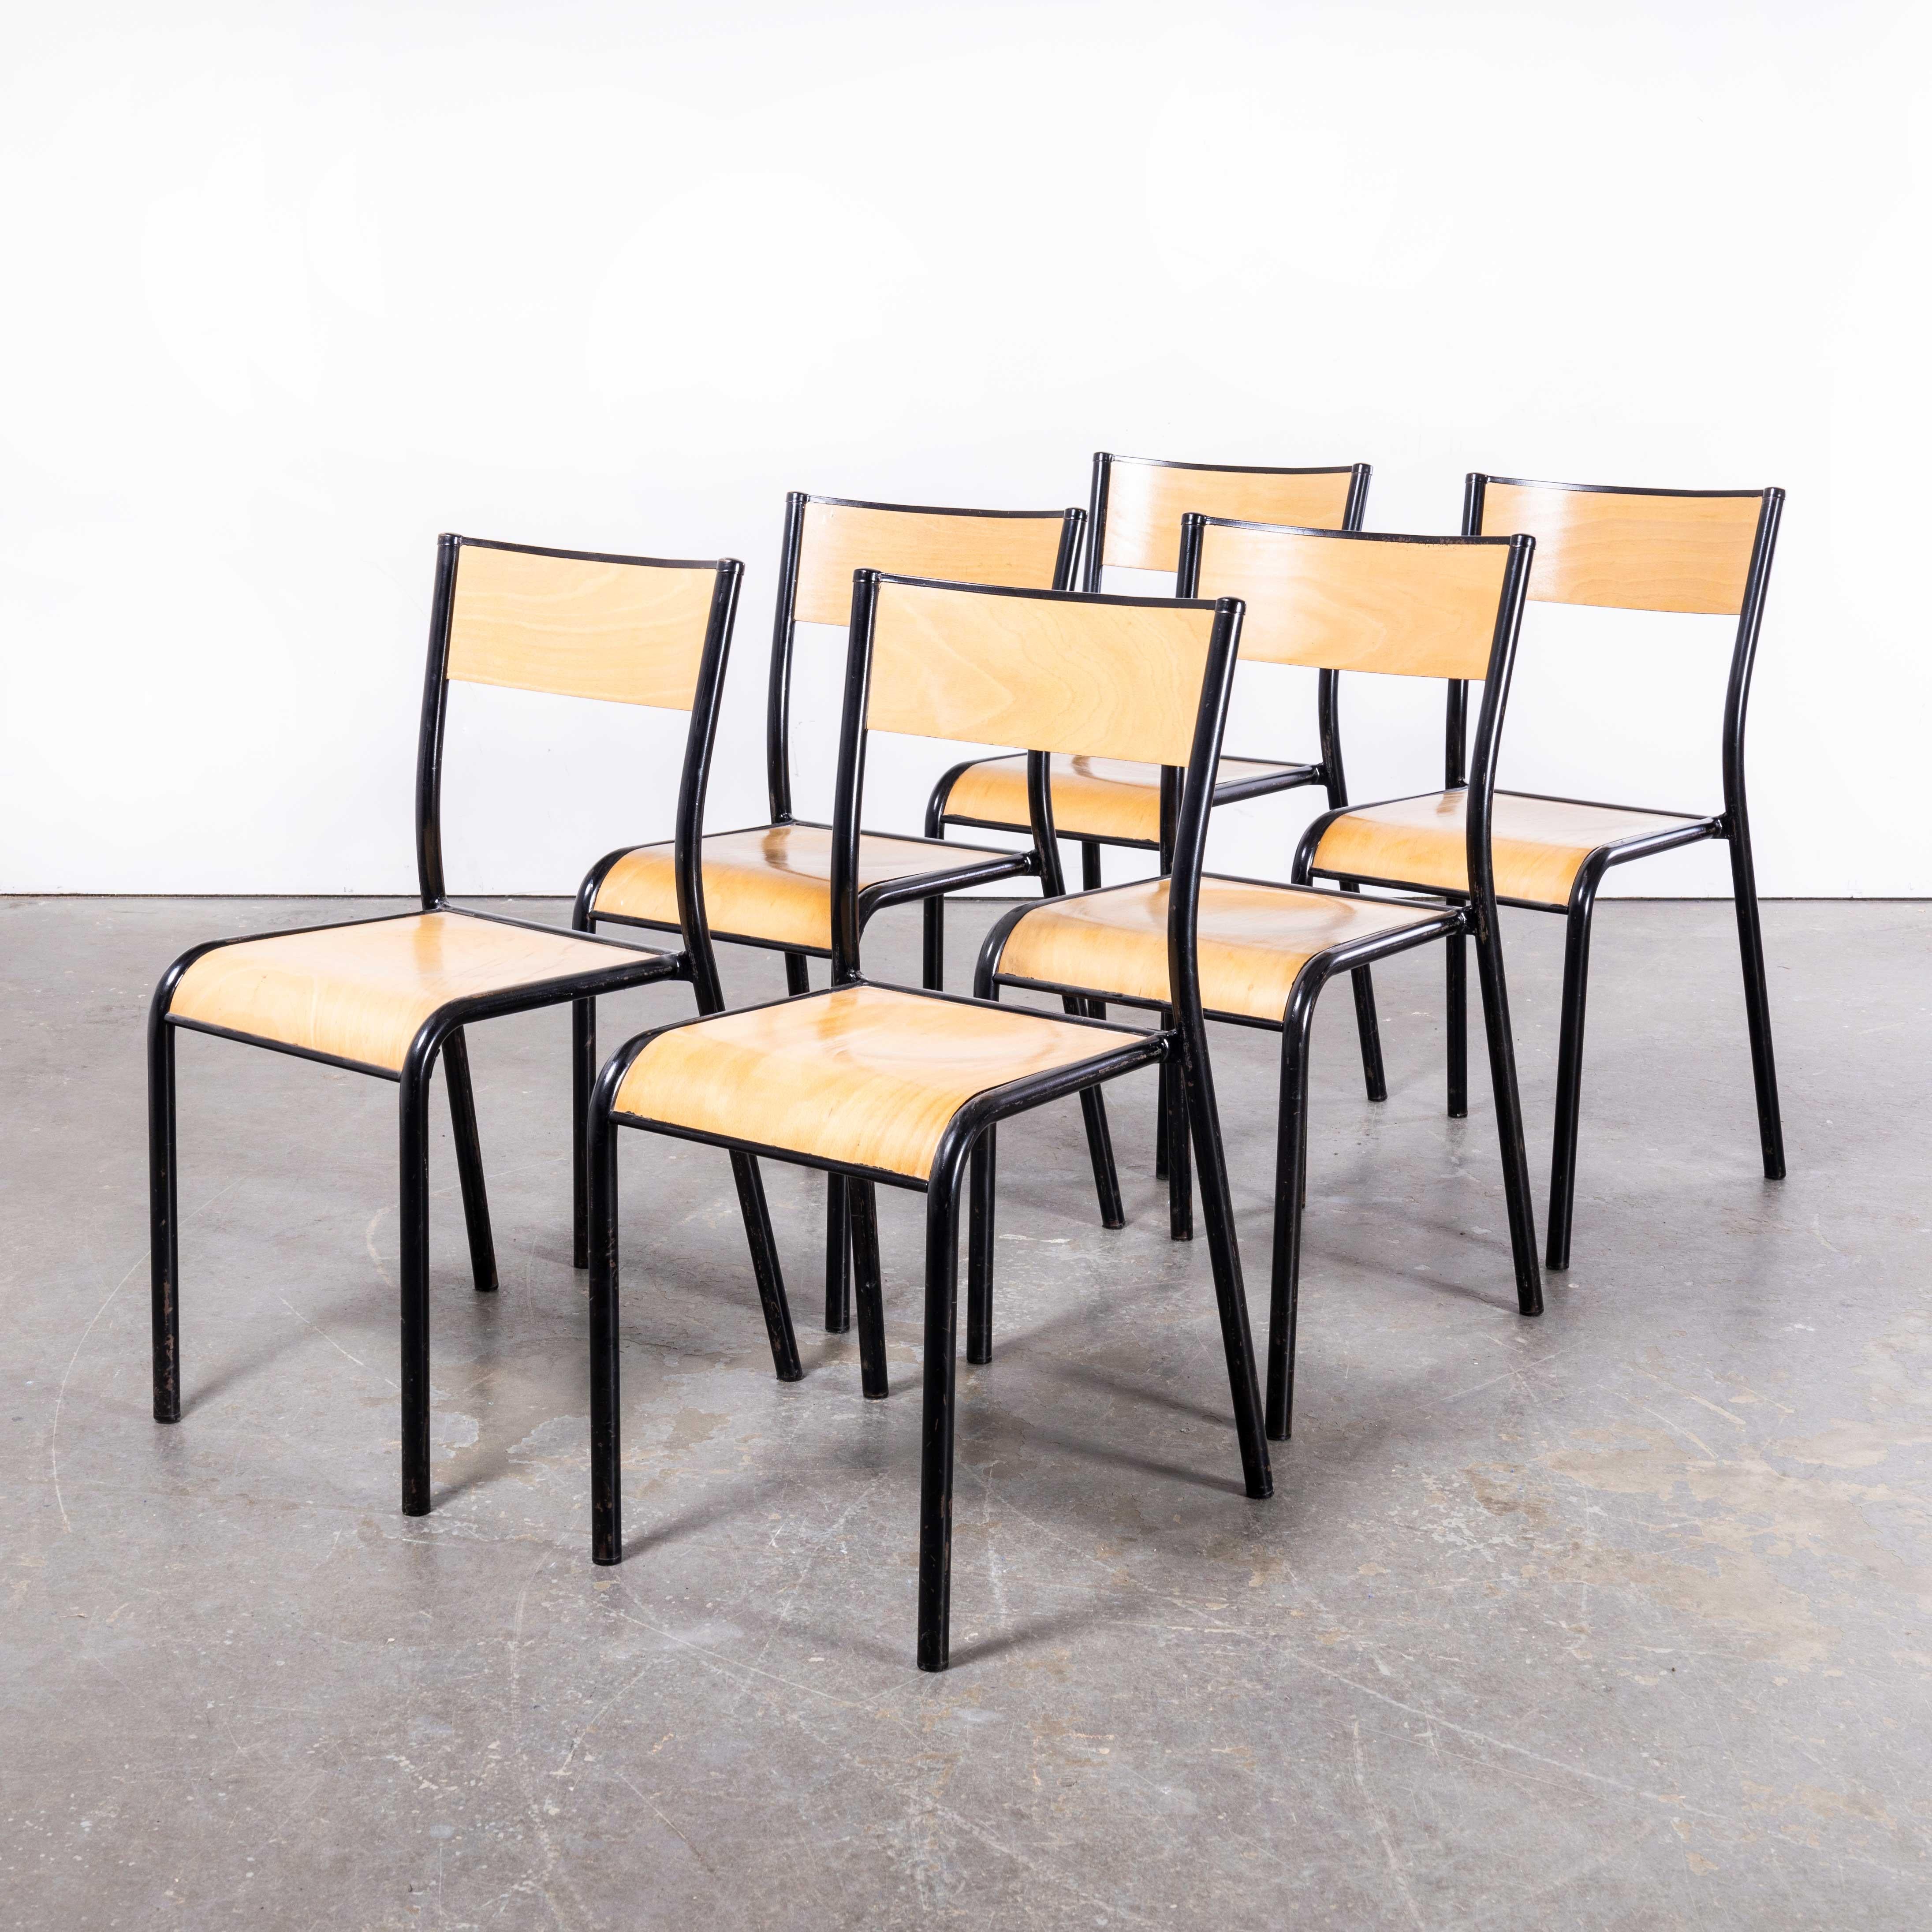 1950s French Mullca Stacking School – Dining Chairs – Black Model 510 – Set Of Six
1950s French Mullca Stacking School – Dining Chairs – Black Model 510 – Set Of Six. One of our most favourite chairs, in 1947 Robert Muller and Gaston Cavaillon